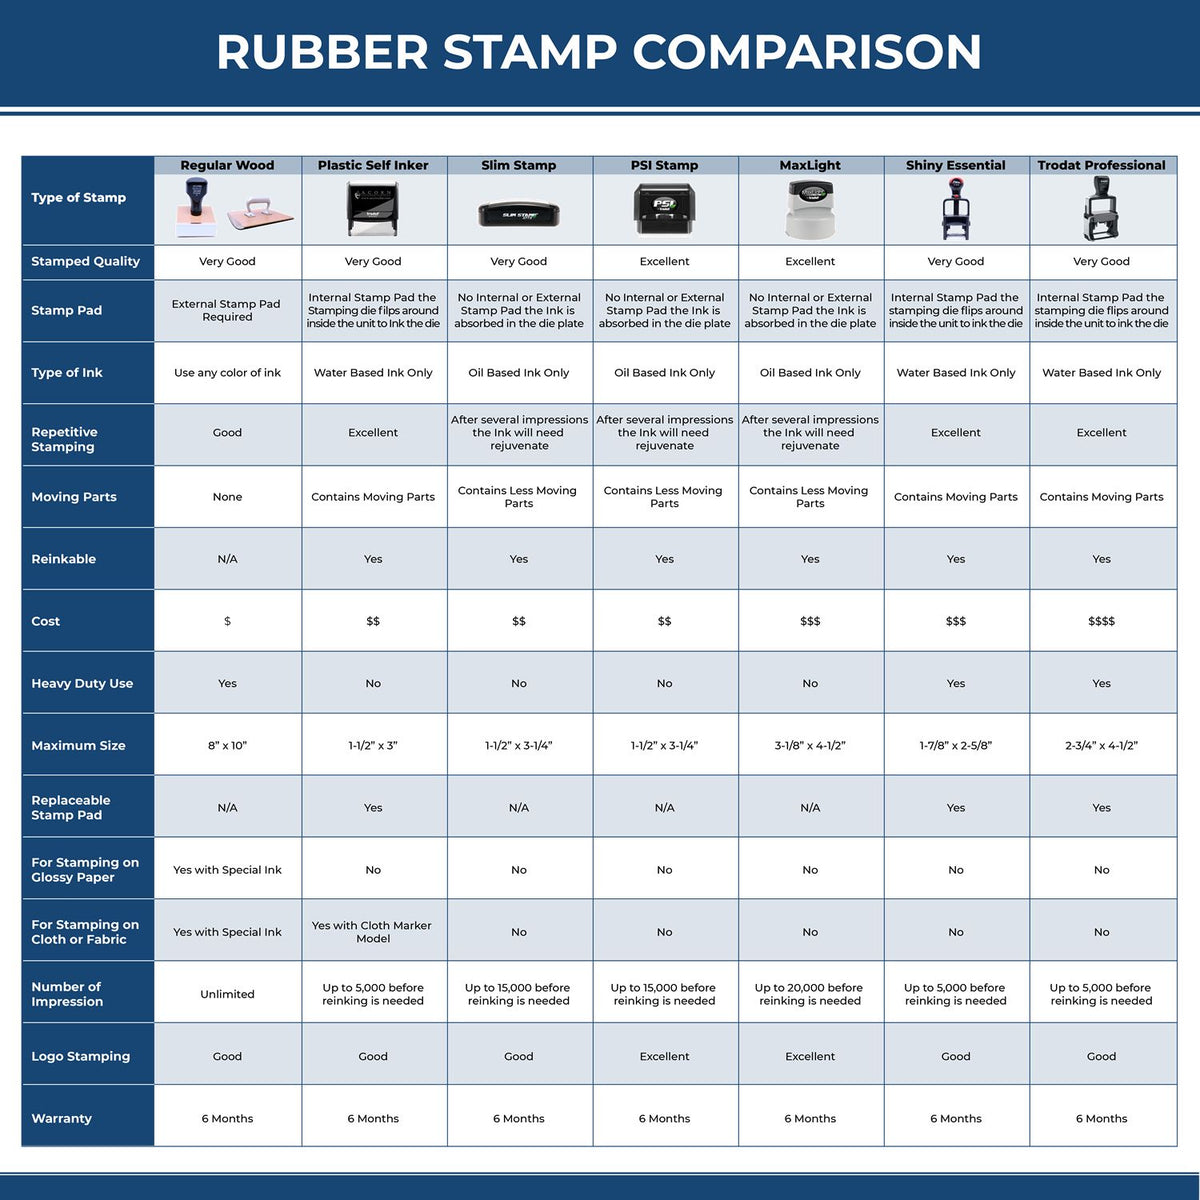 A comparison chart for the different types of mount models available for the PSI Montana Notary Stamp.